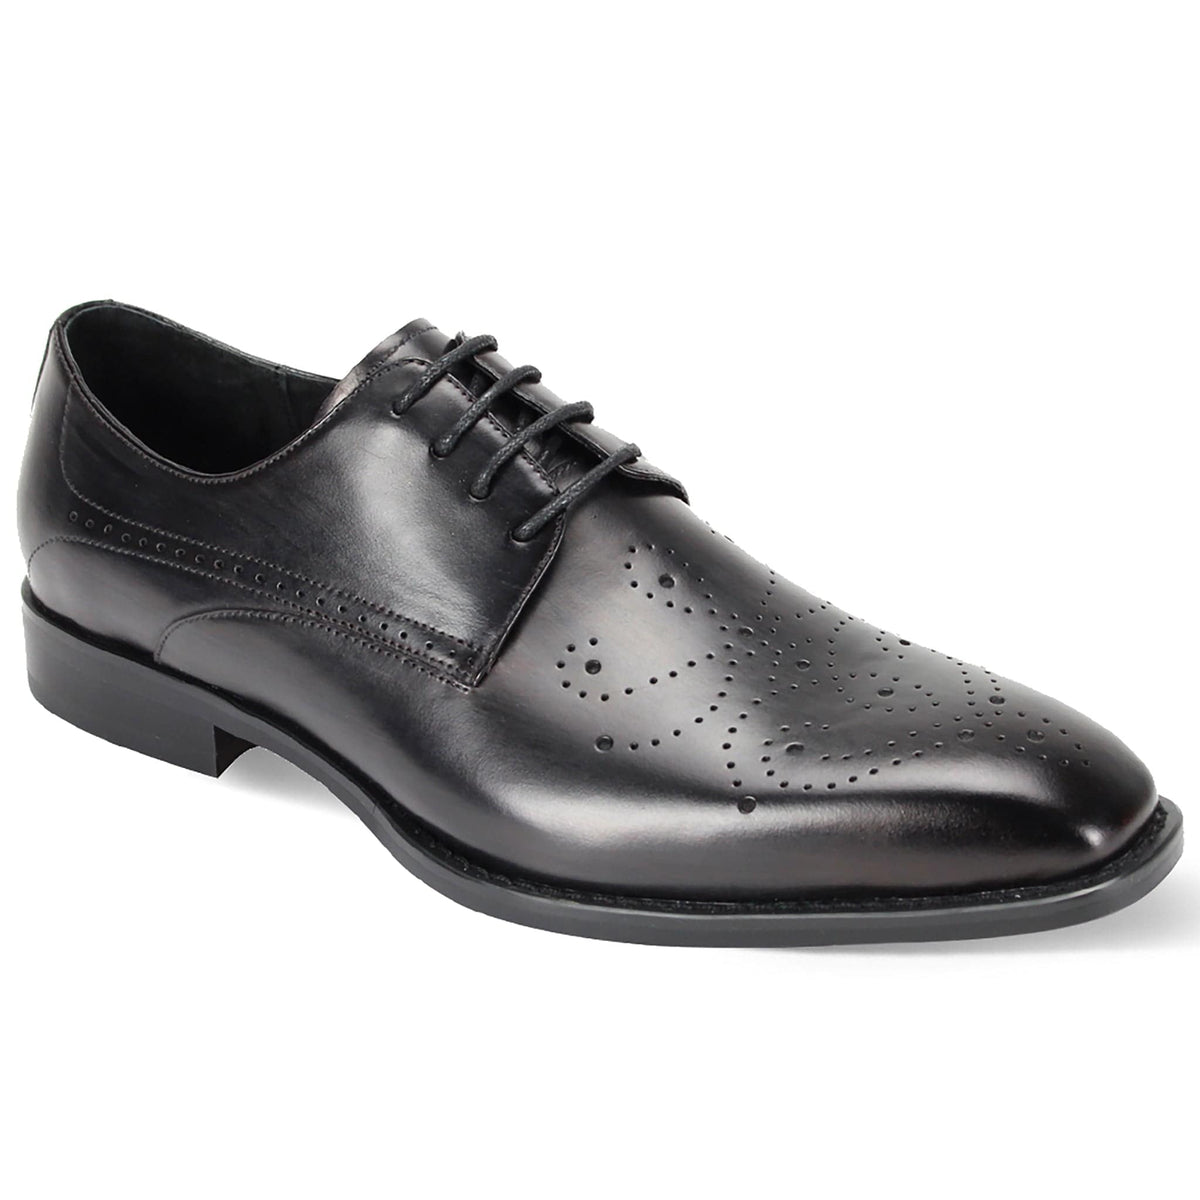 GIOVANNI LEATHER SHOES FT BLACK / 7 GIOVANNI LEATHER SHOES-JOEL